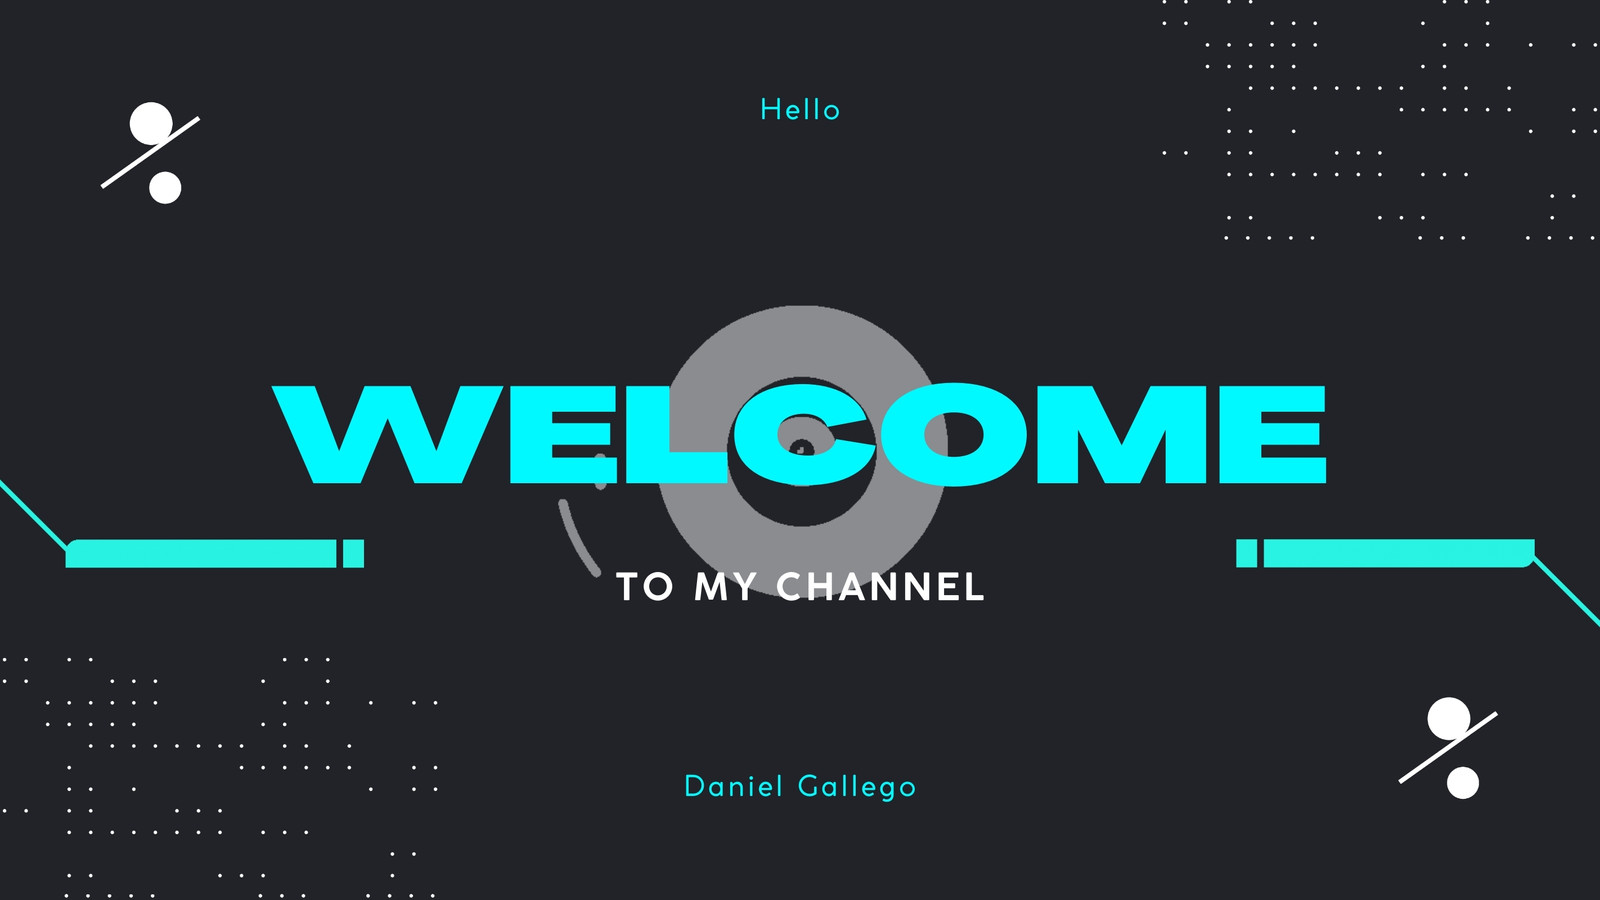 Page 2 - Free YouTube intro templates to customize for your channel | Canva